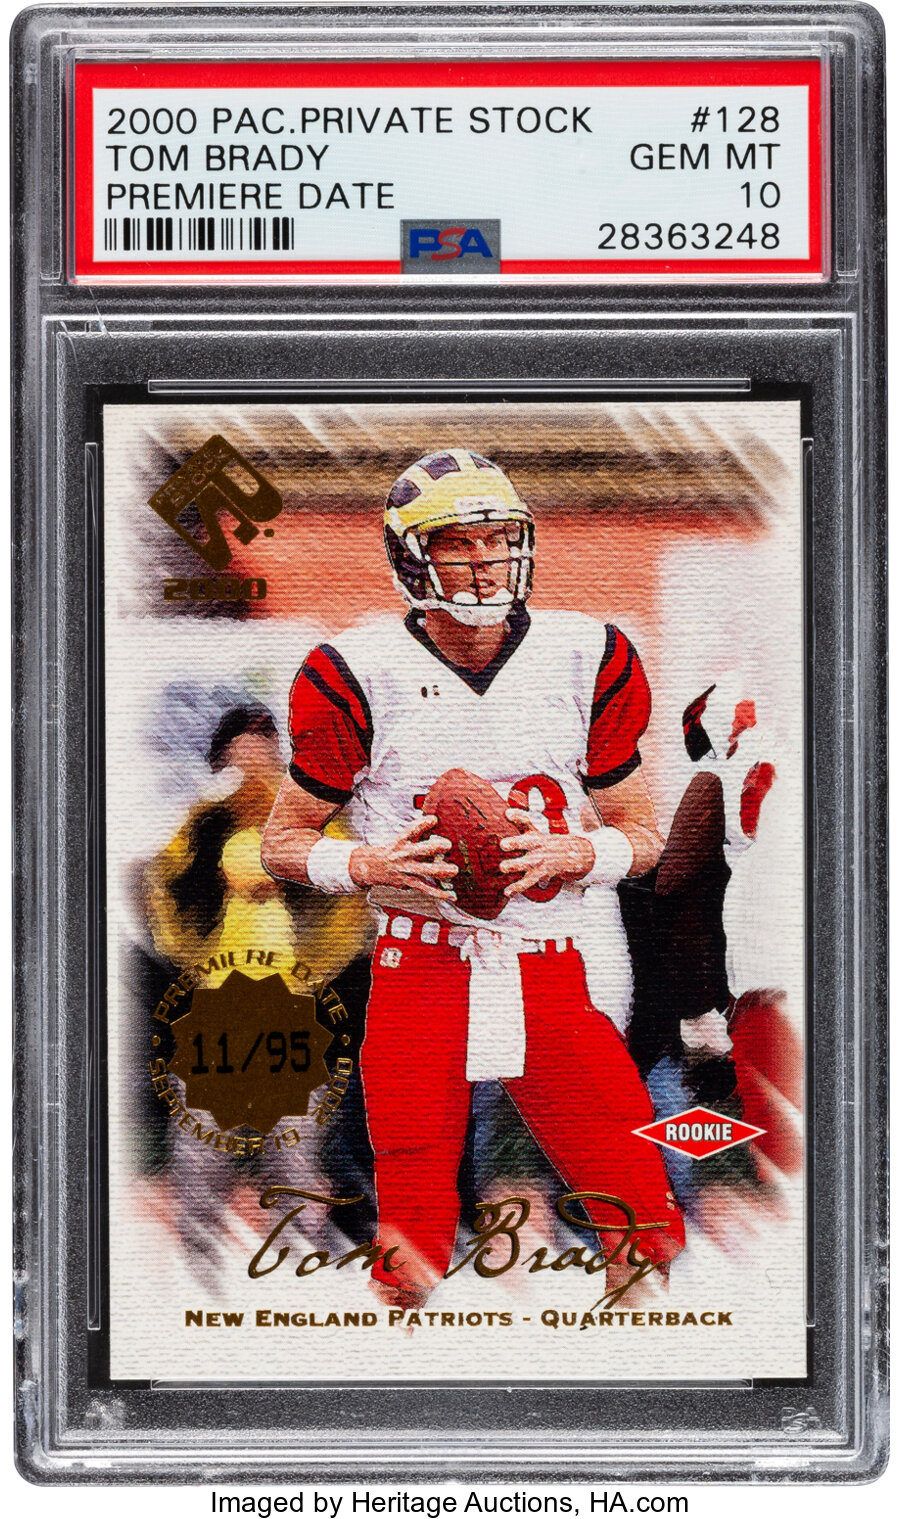 2000 Pacific Private Stock Tom Brady Premiere Date #128 PSA Gem Mint 10 - Serial Numbered 11/95